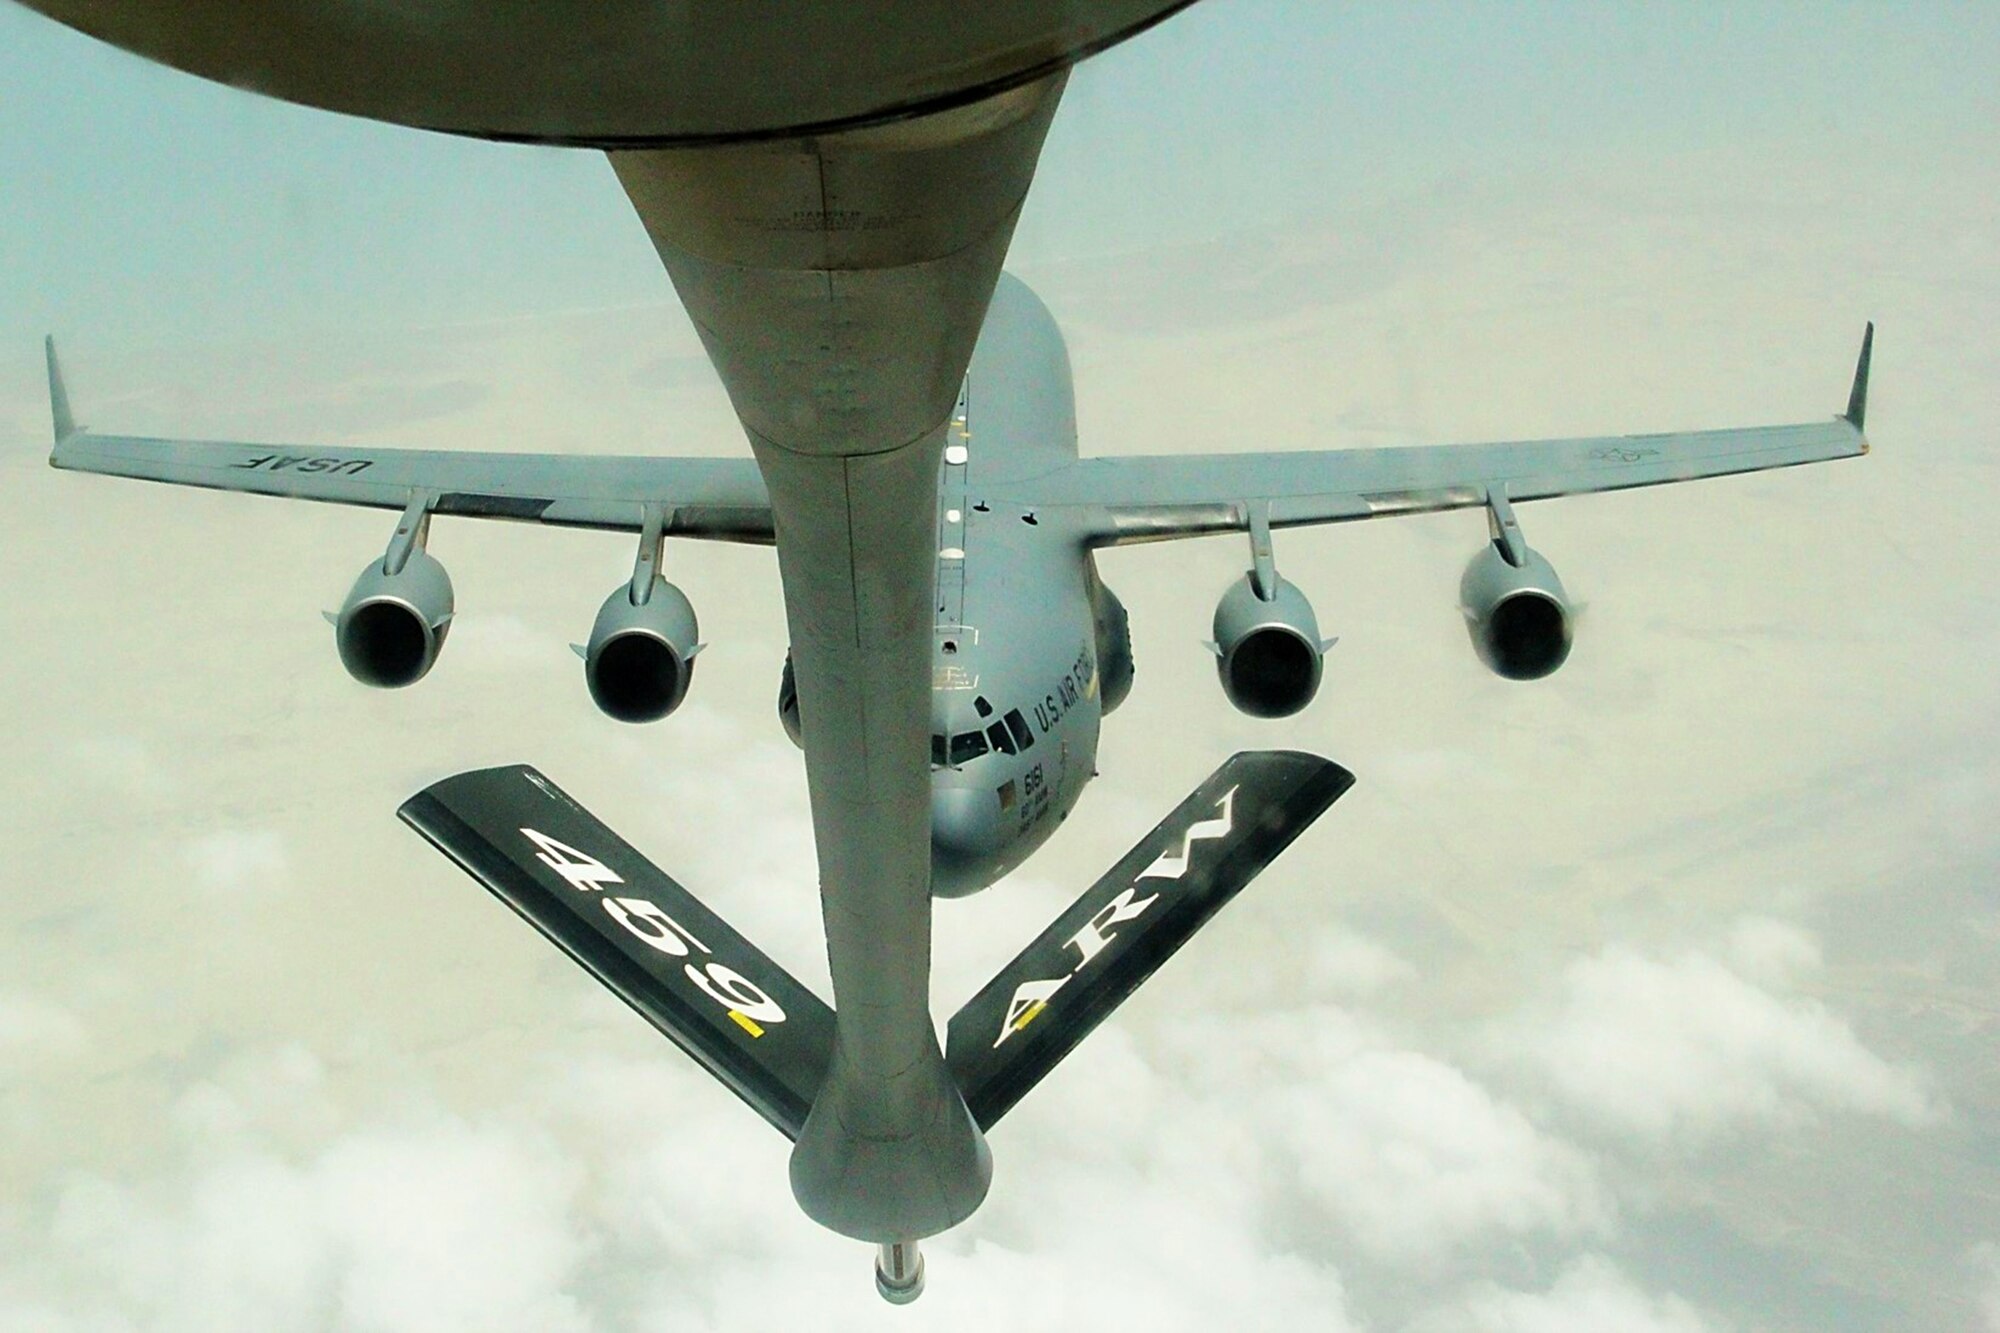 WRIGHT-PATTERSON AIR FORCE BASE, Ohio – A KC-135 Stratotanker from the 459th Air Refueling Wing, Joint Base Andrews, Md., refuels a C-17 Globemaster III over Southwest Asia. The C-17 is being flown by members of the 89th Airlift Squadron currently augmenting an active duty crew while deployed with the 385th Air Expeditionary Group, Detachment 1. (Courtesy photo)